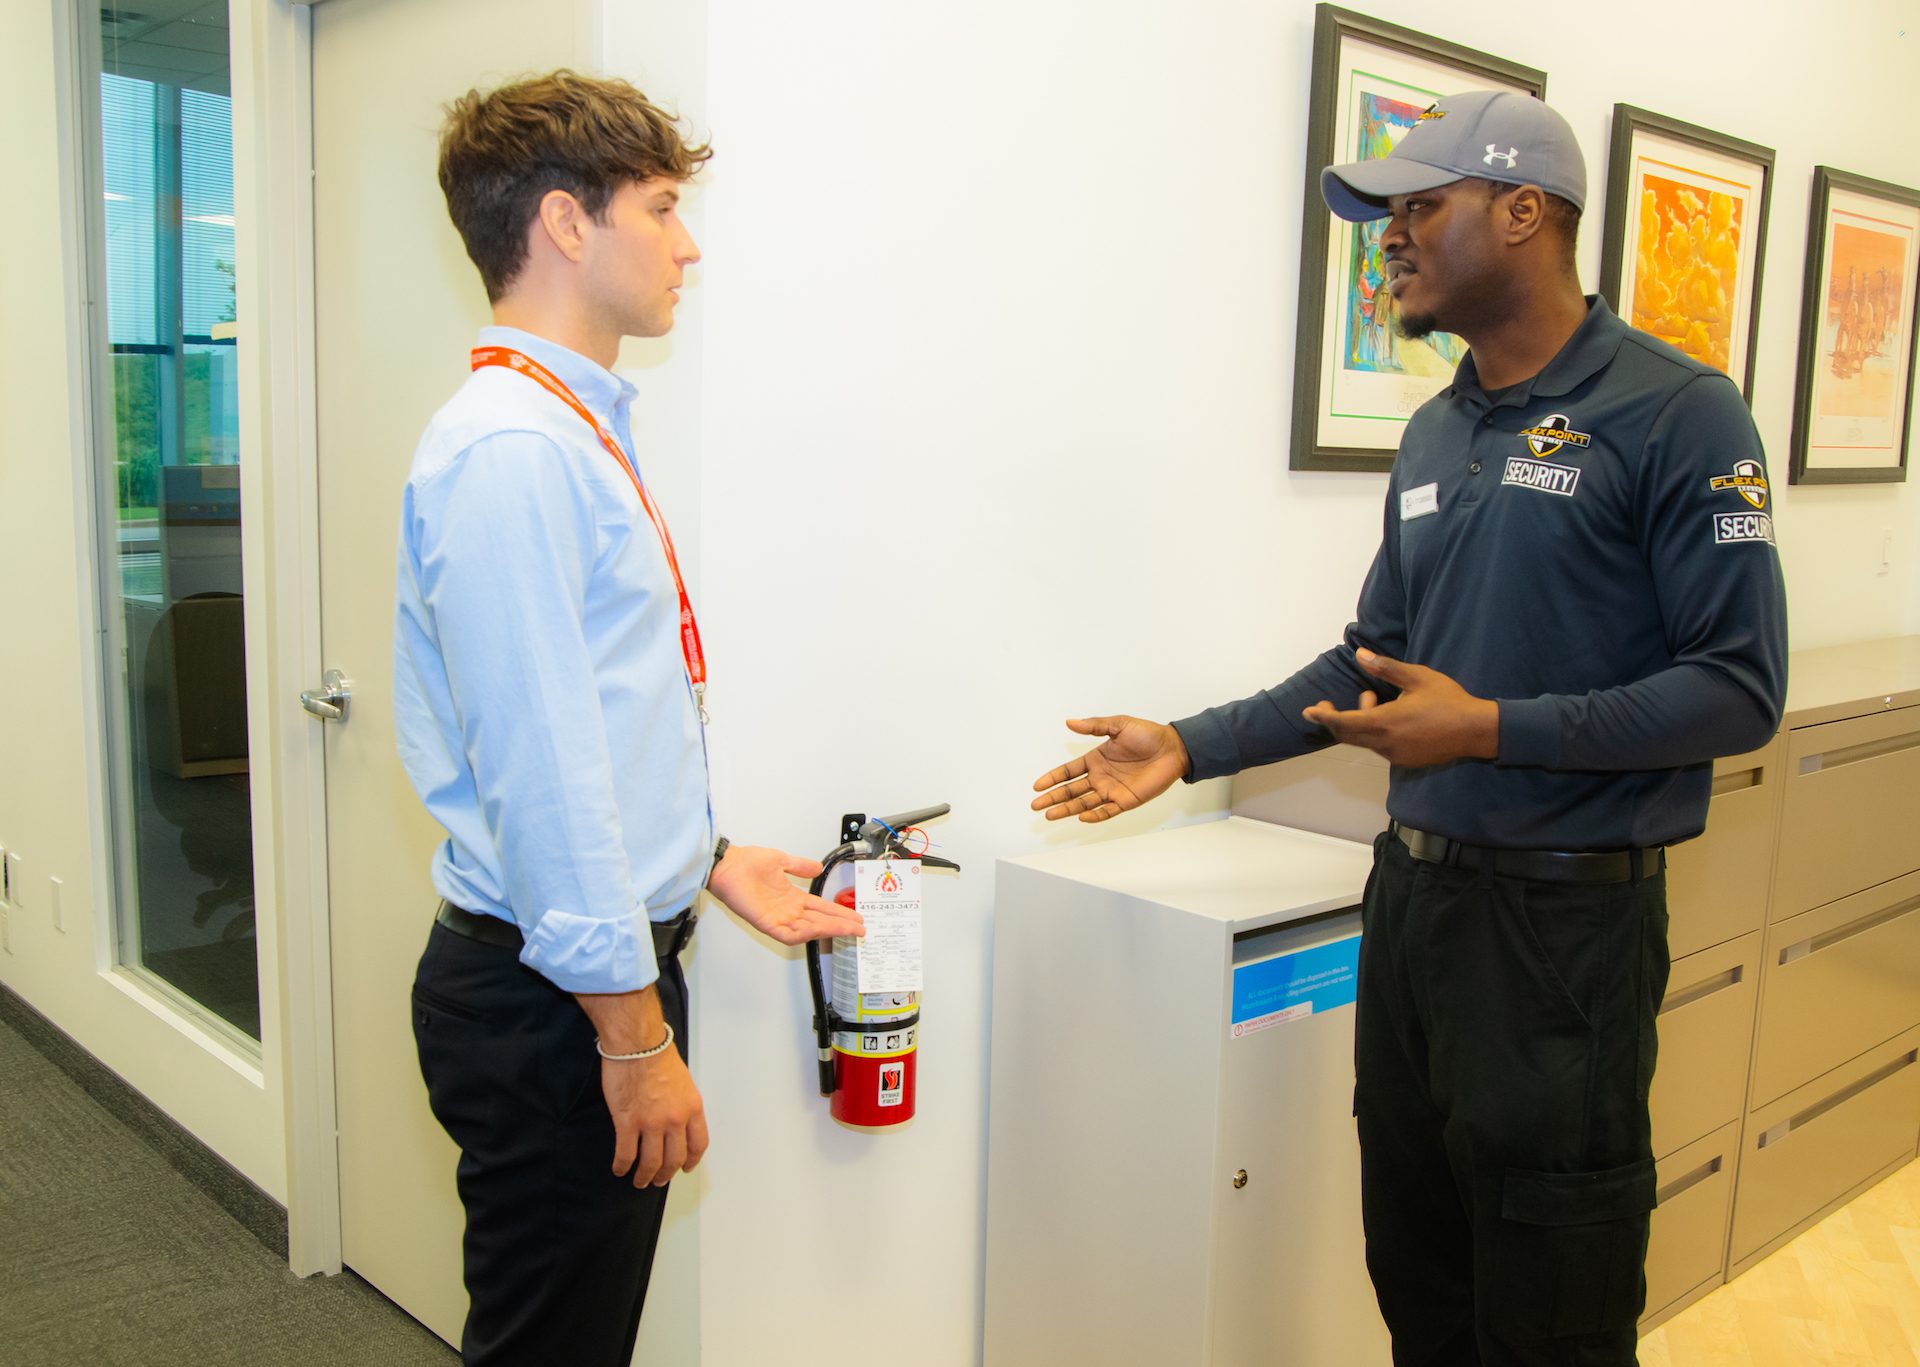 A male Flex Point Security guard speaking with a male employee at an office about fire prevention next to a fire extinguisher